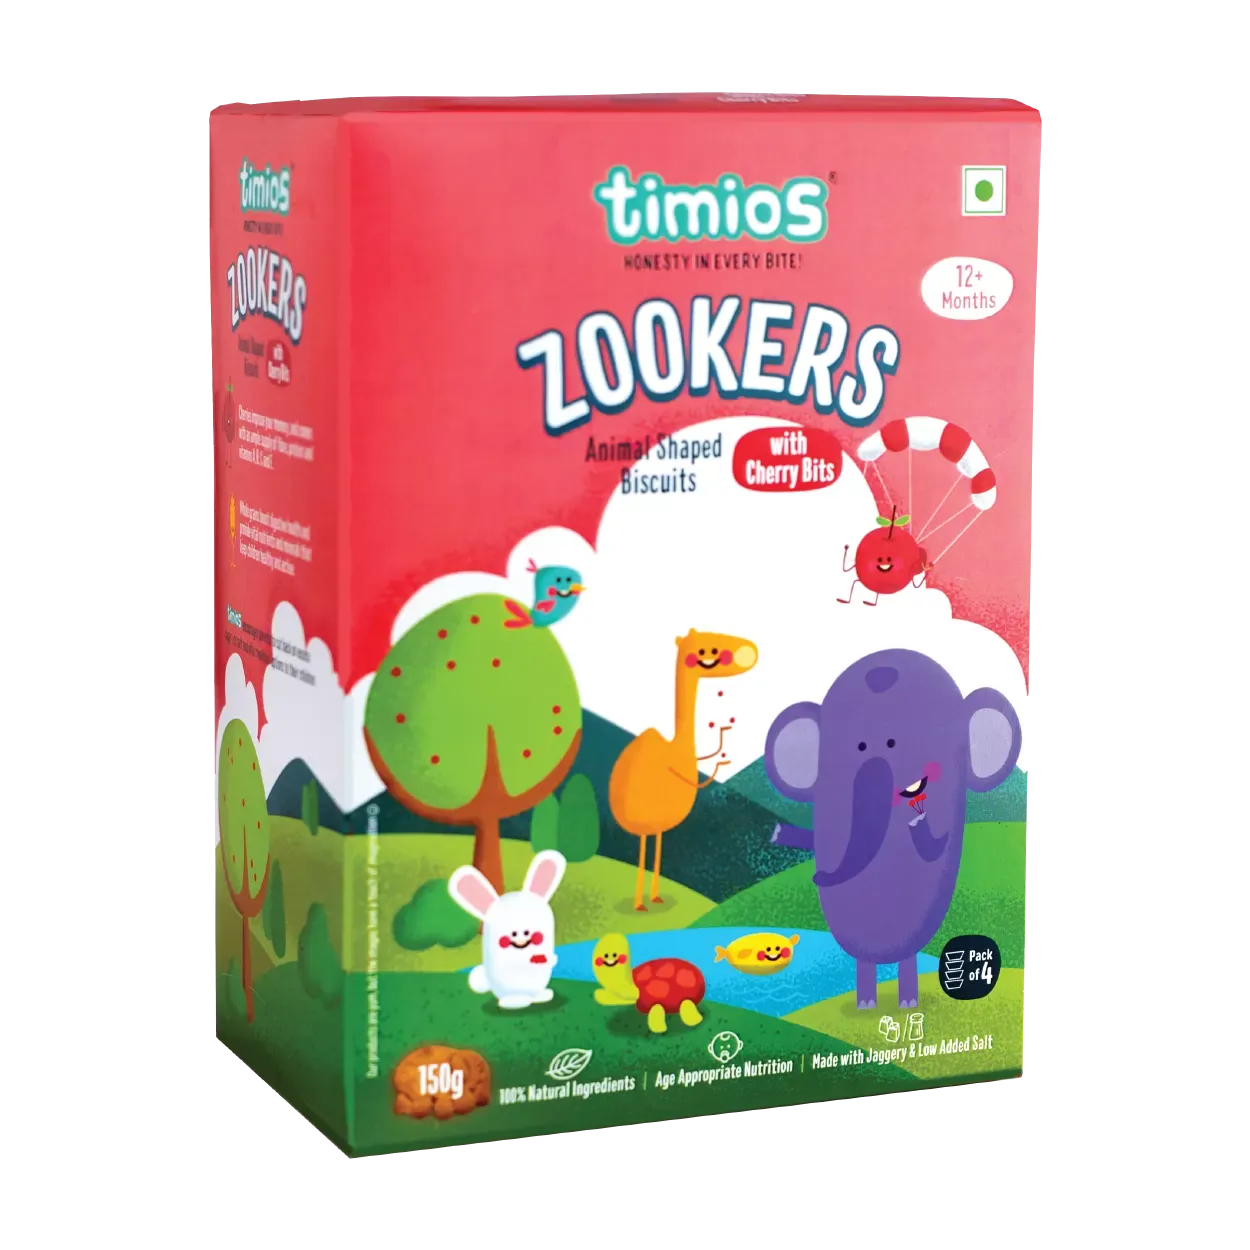 Timios Zookers Cherry Bits Animal Shaped Biscuits for Toddlers Image